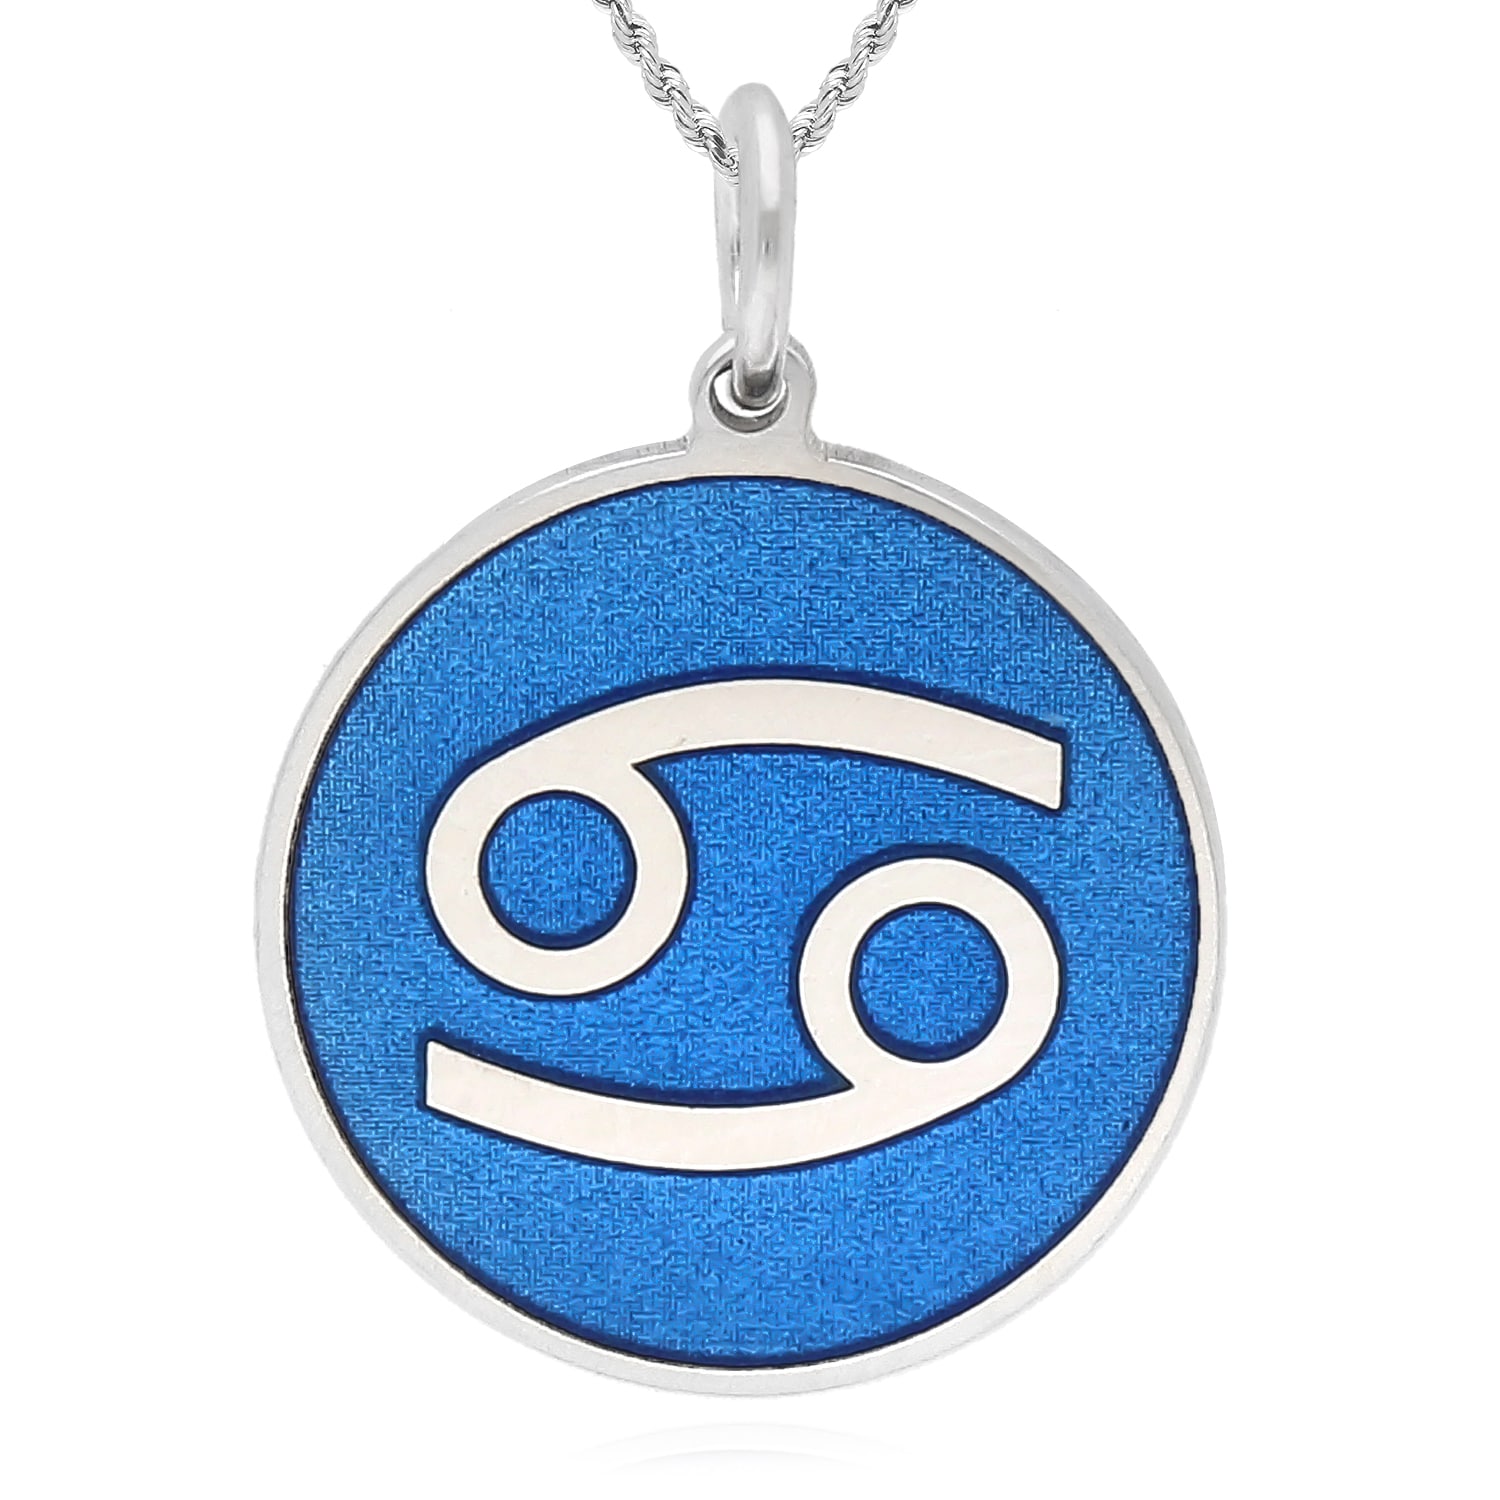 Sterling Silver Round Blue Zodiac Signs Pendant 0.7" - Cancer